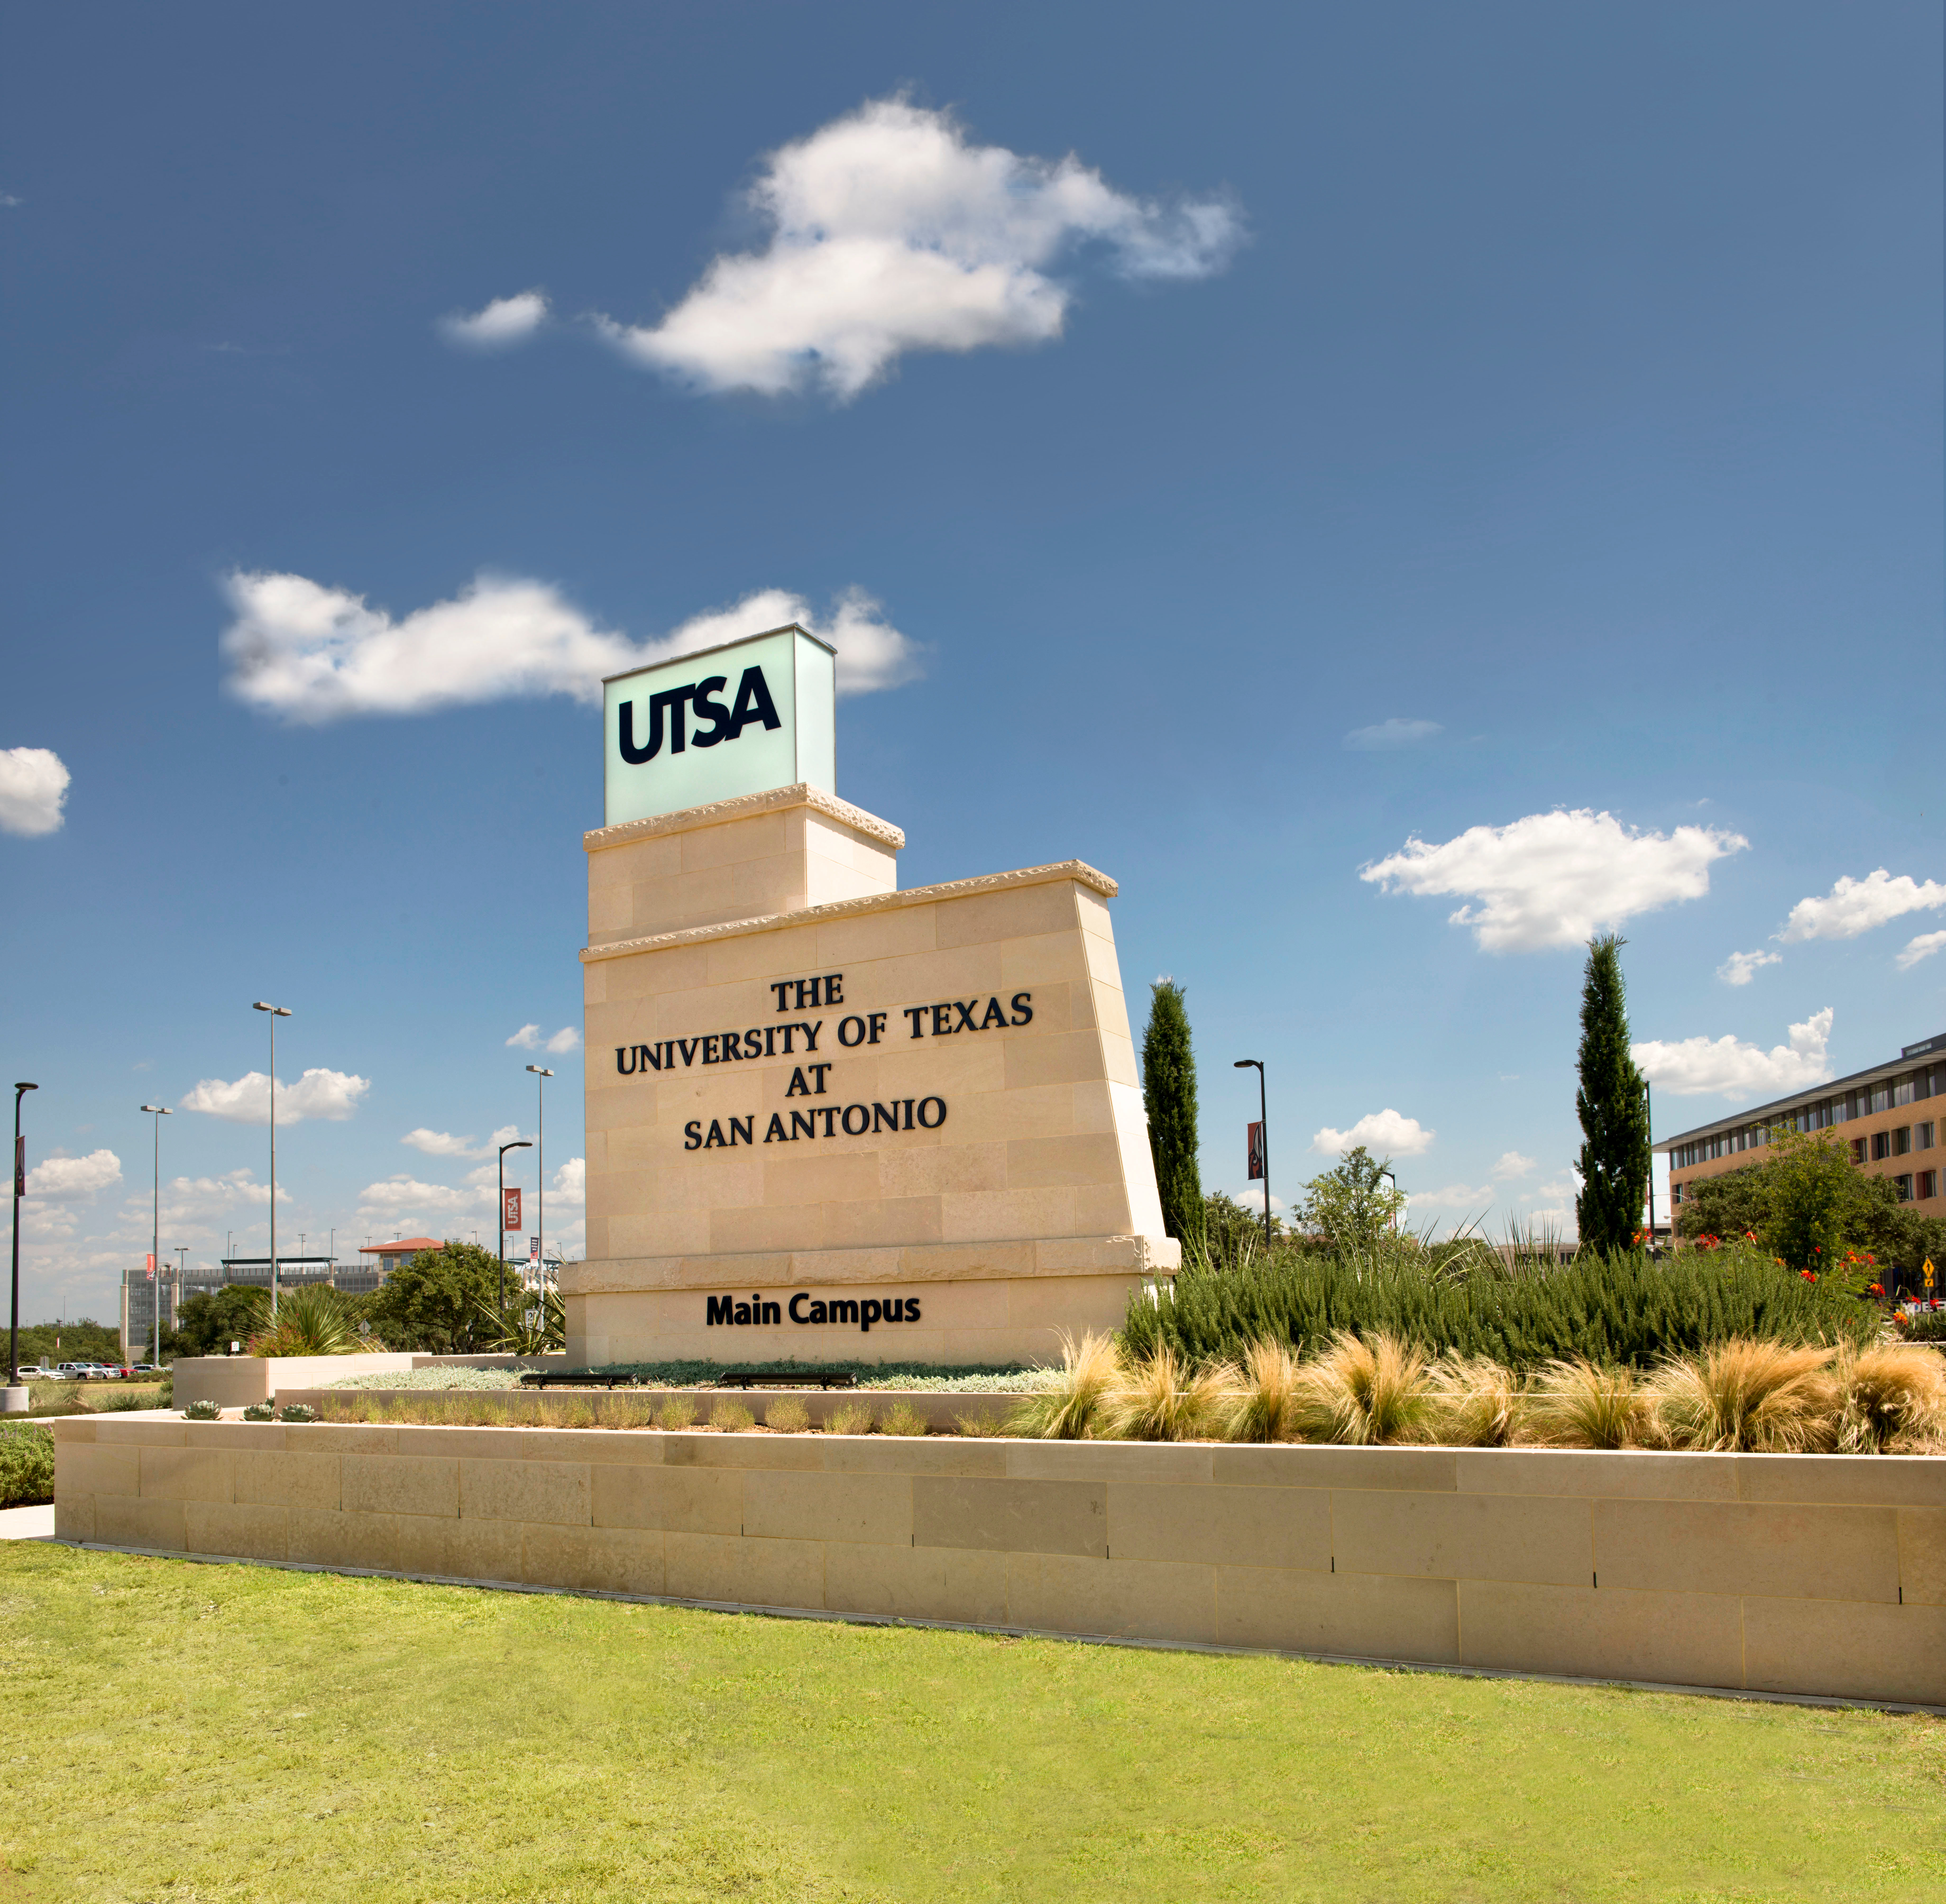 UTSA's Tuition and Fees Proposal